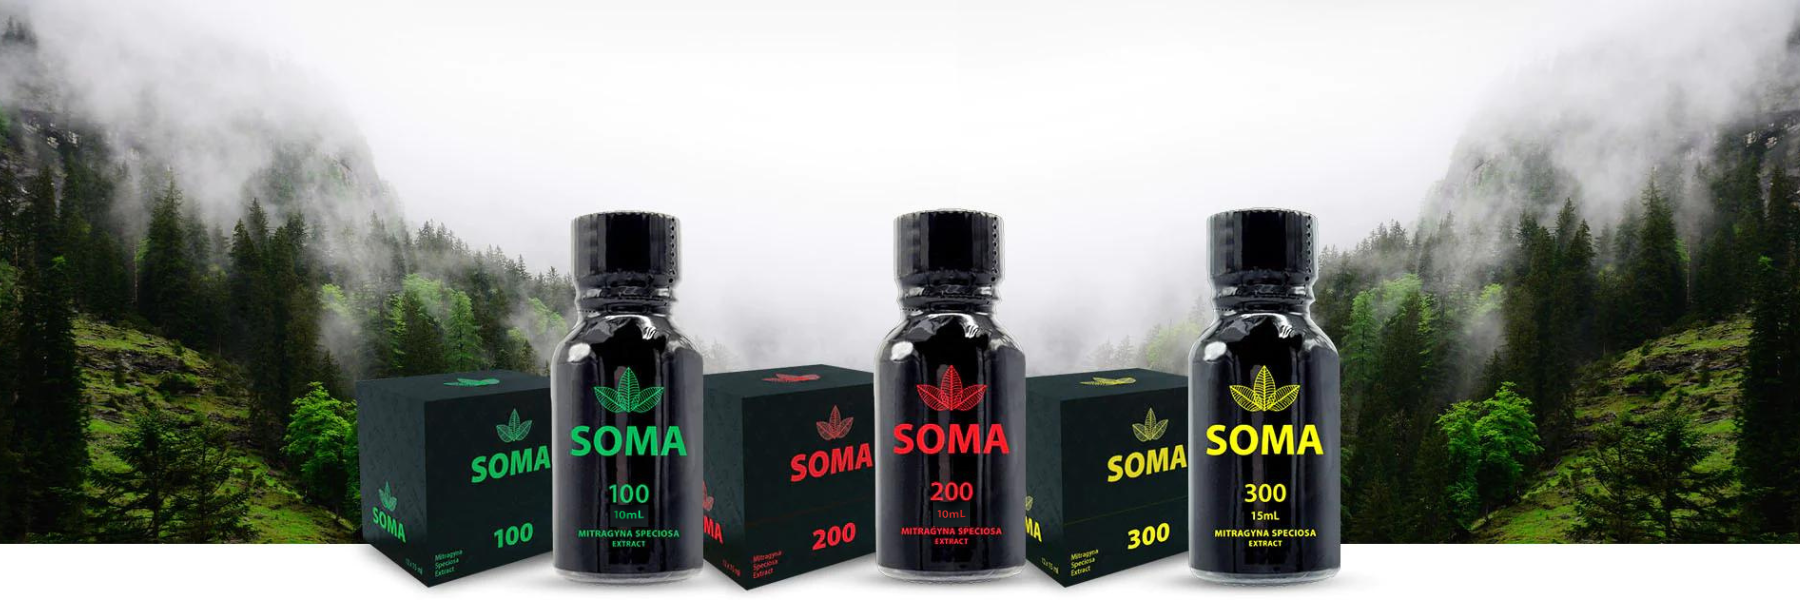 Stream Buy Soma 350mg Online Overnight ➤ Next Day Free Delivery